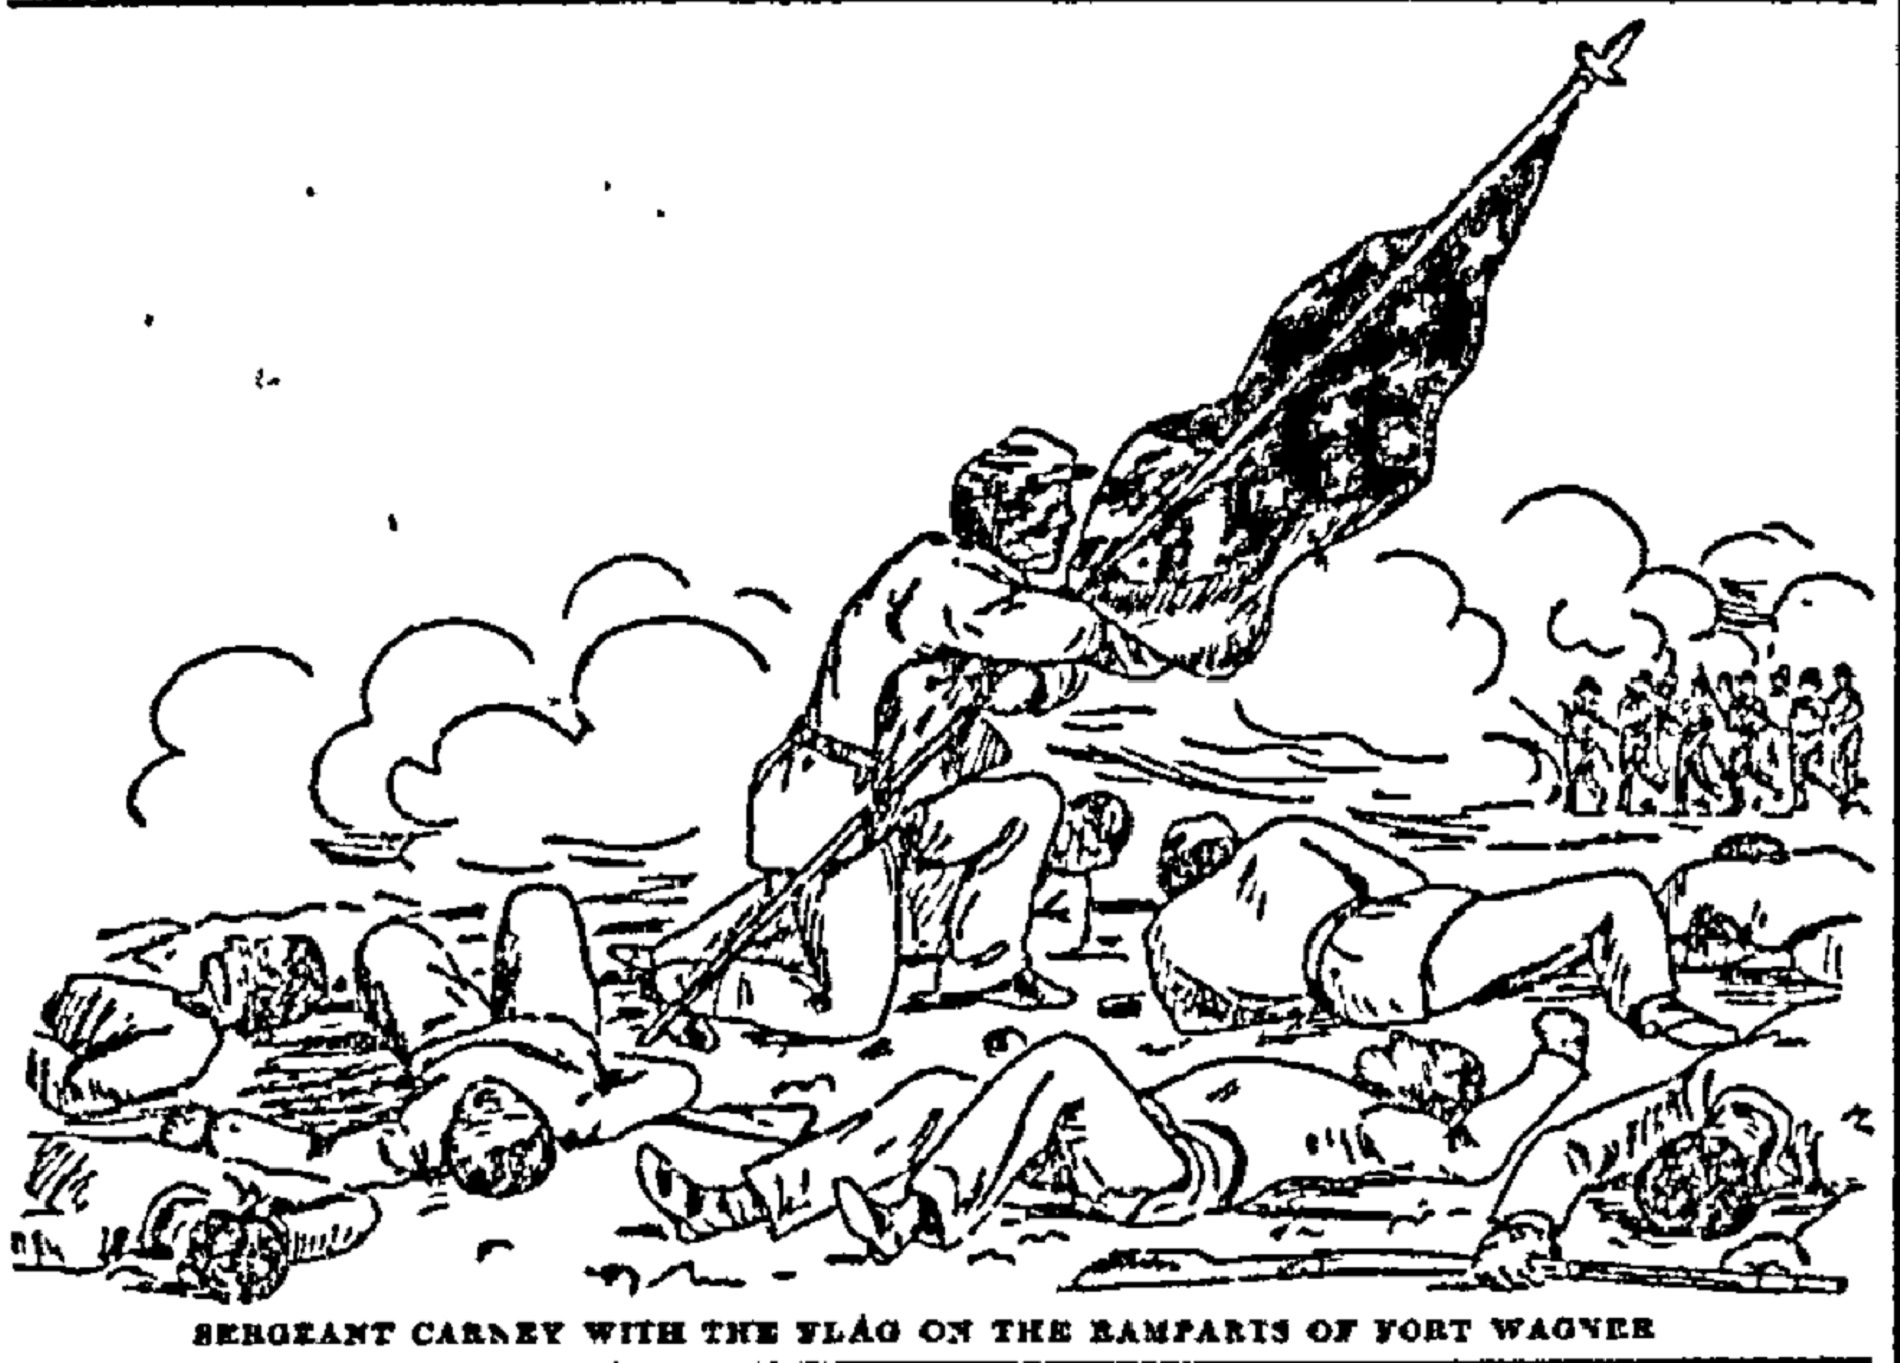 Black and white newspaper drawing of Sergeant Carney carrying the American flag with several people lying on the ground around him. A small group is standing in the background, with smoke around them. Caption reads: Sergeant Carney with the flag on the ramparts of Fort Wagner